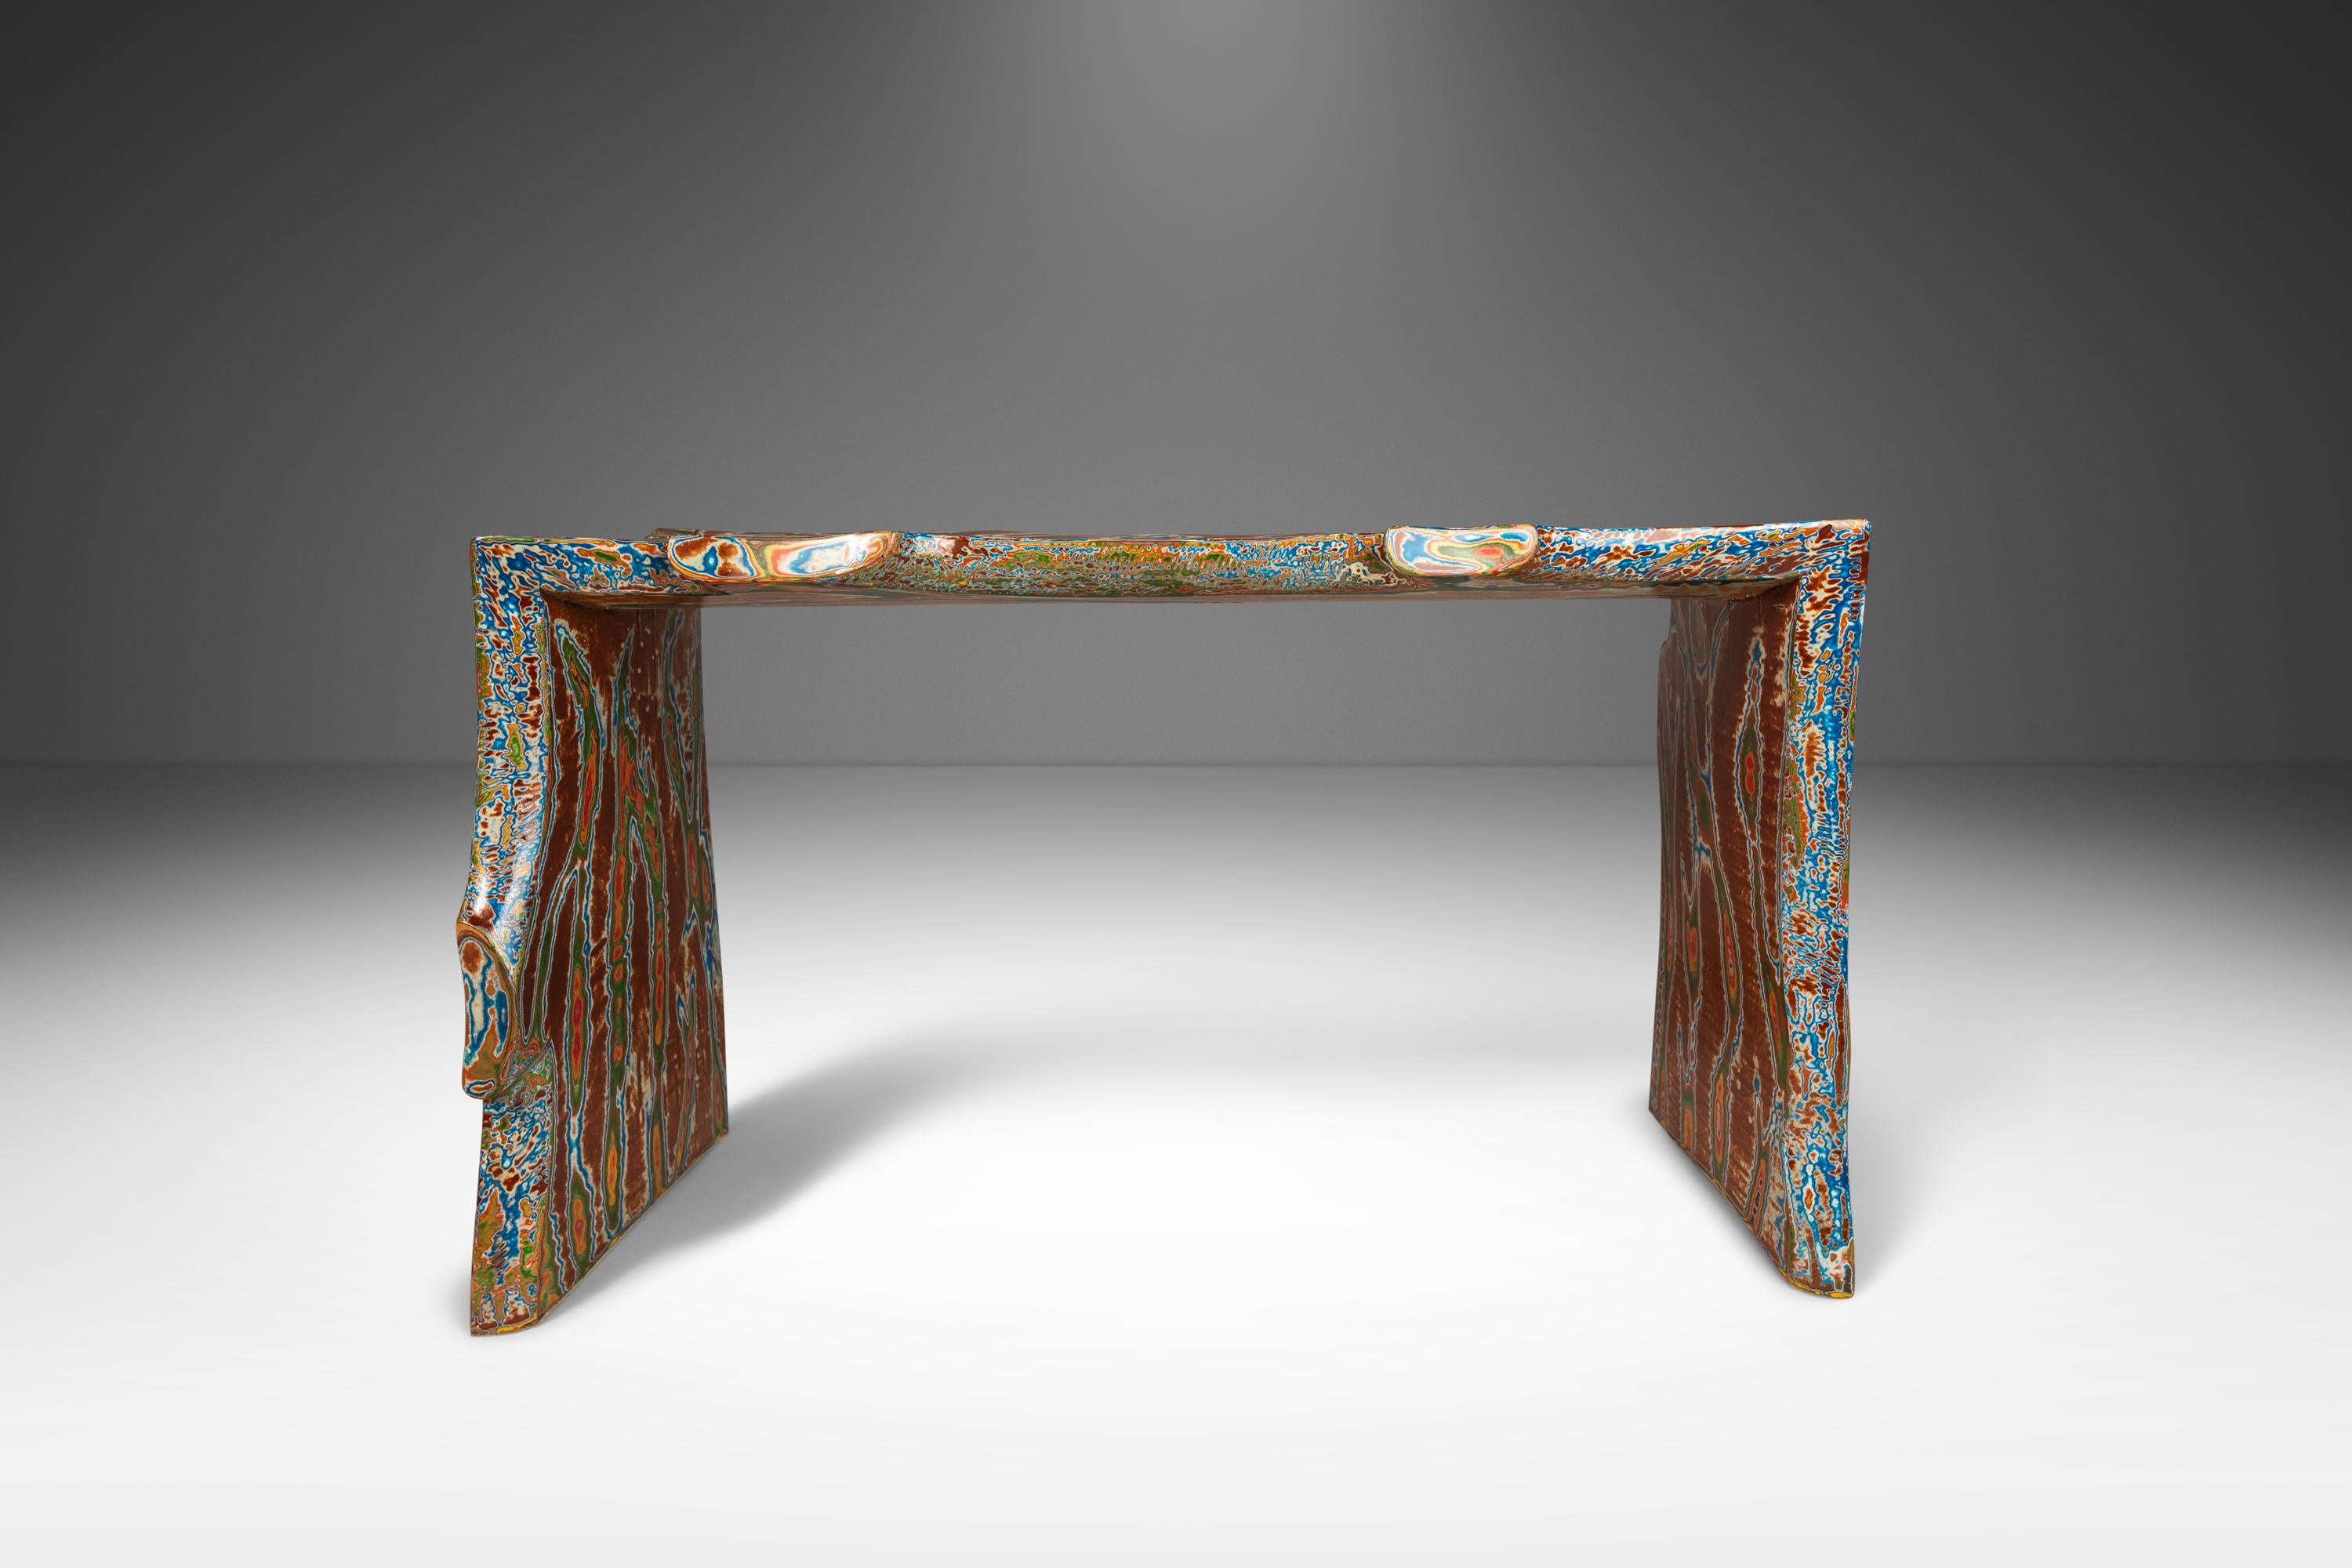 J. Dunklebarger Organic Modern Studio Craft Bentwood Asymmetrical Abstract Bench For Sale 3